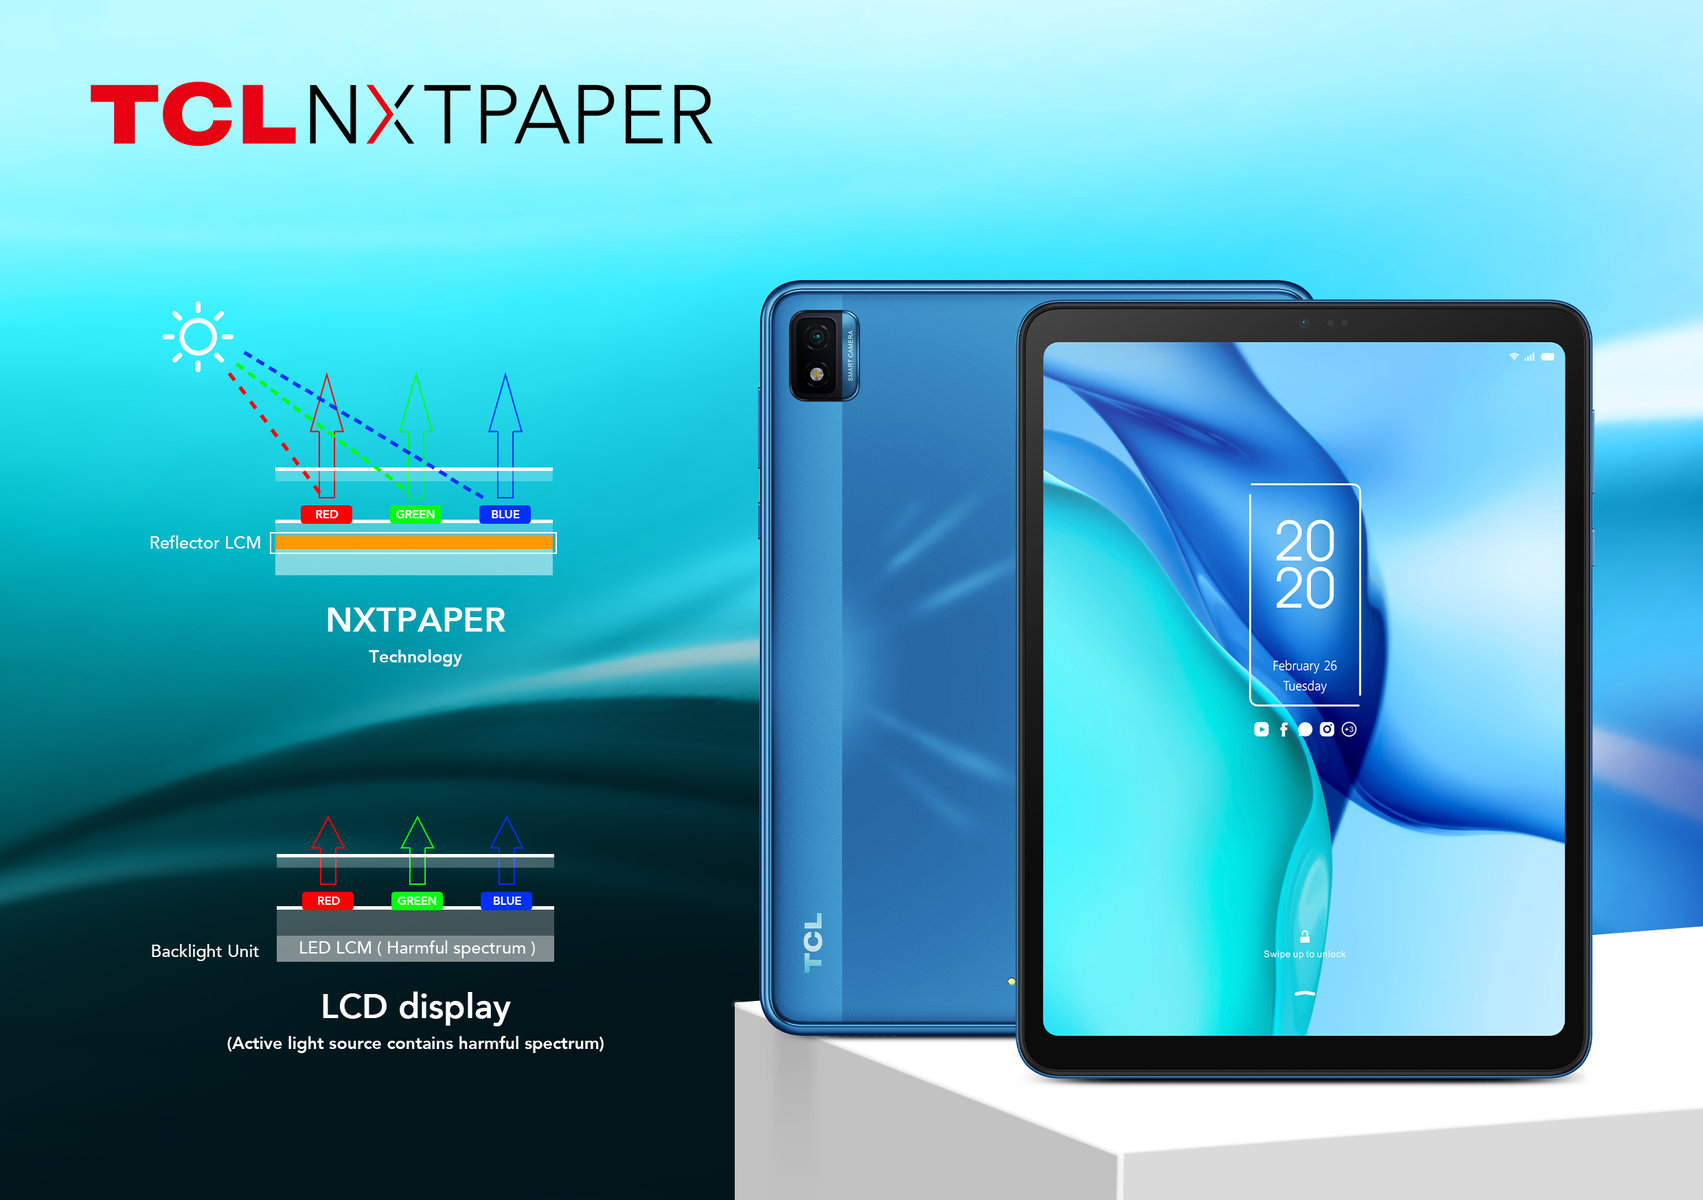 Tcl Announces Its Latest Tablets One Of Which Features The New Nxtpaper Panel Type Notebookcheck Net News